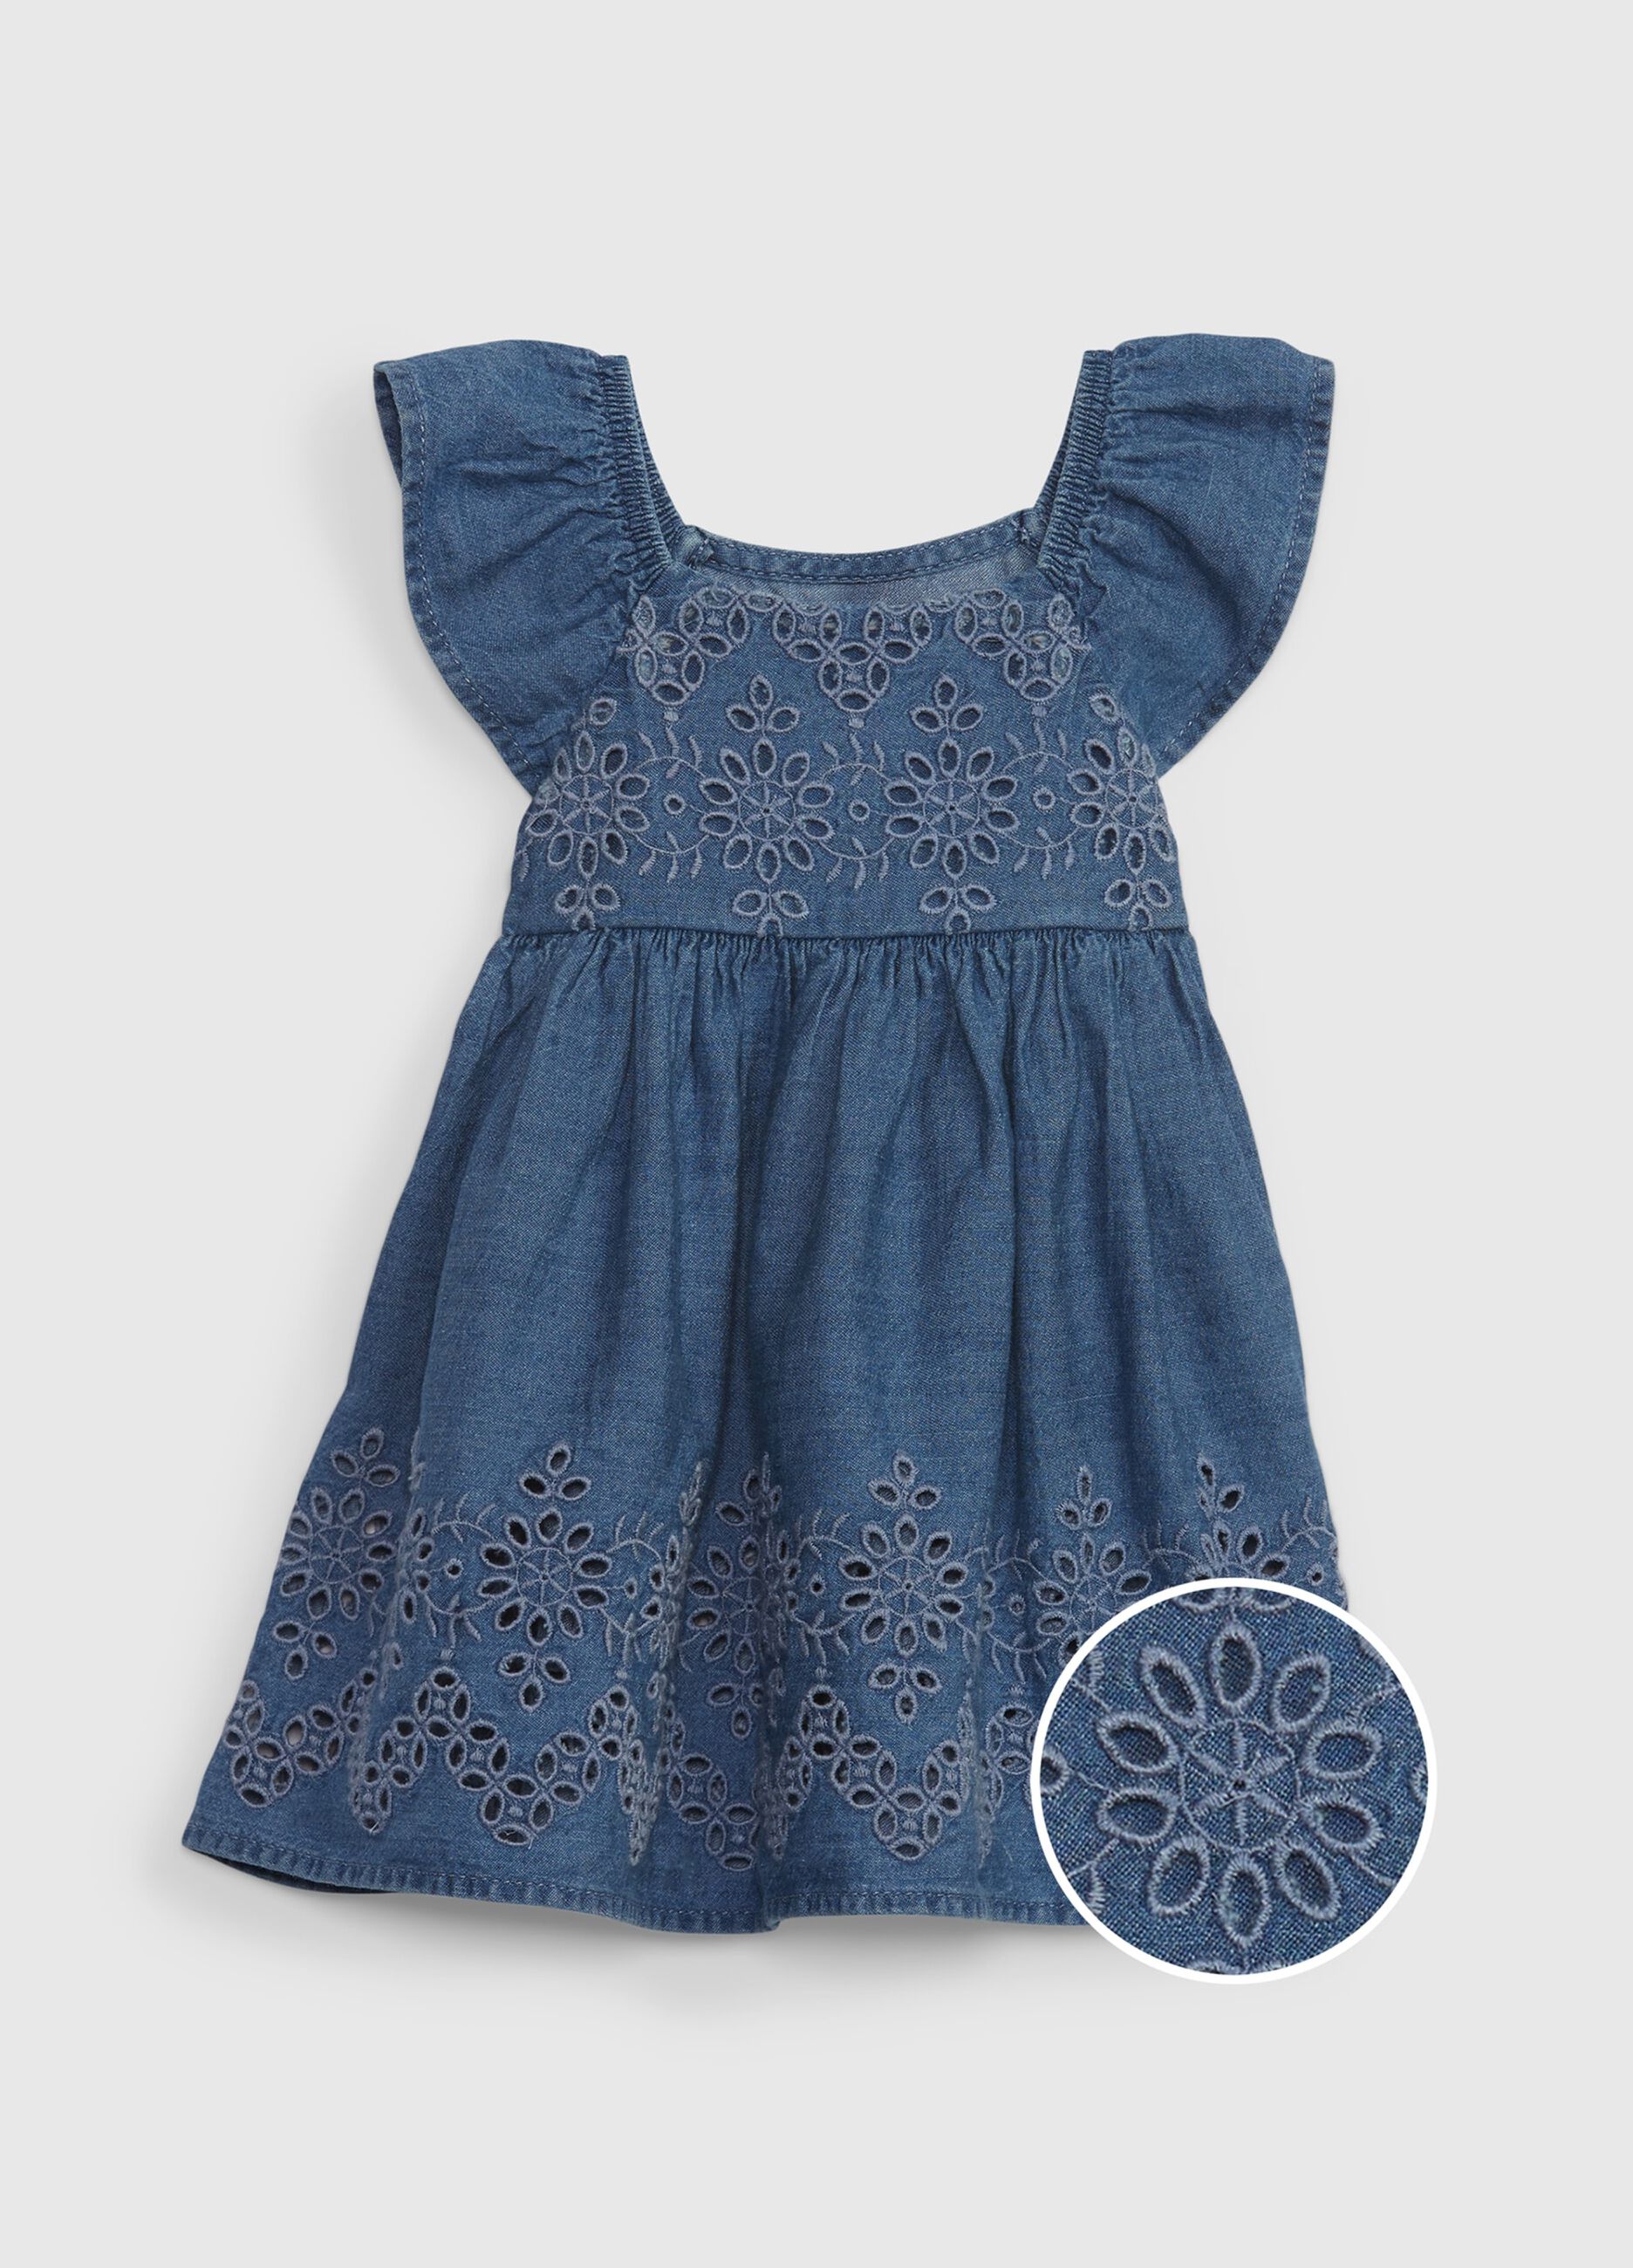 Denim dress with broderie anglaise details